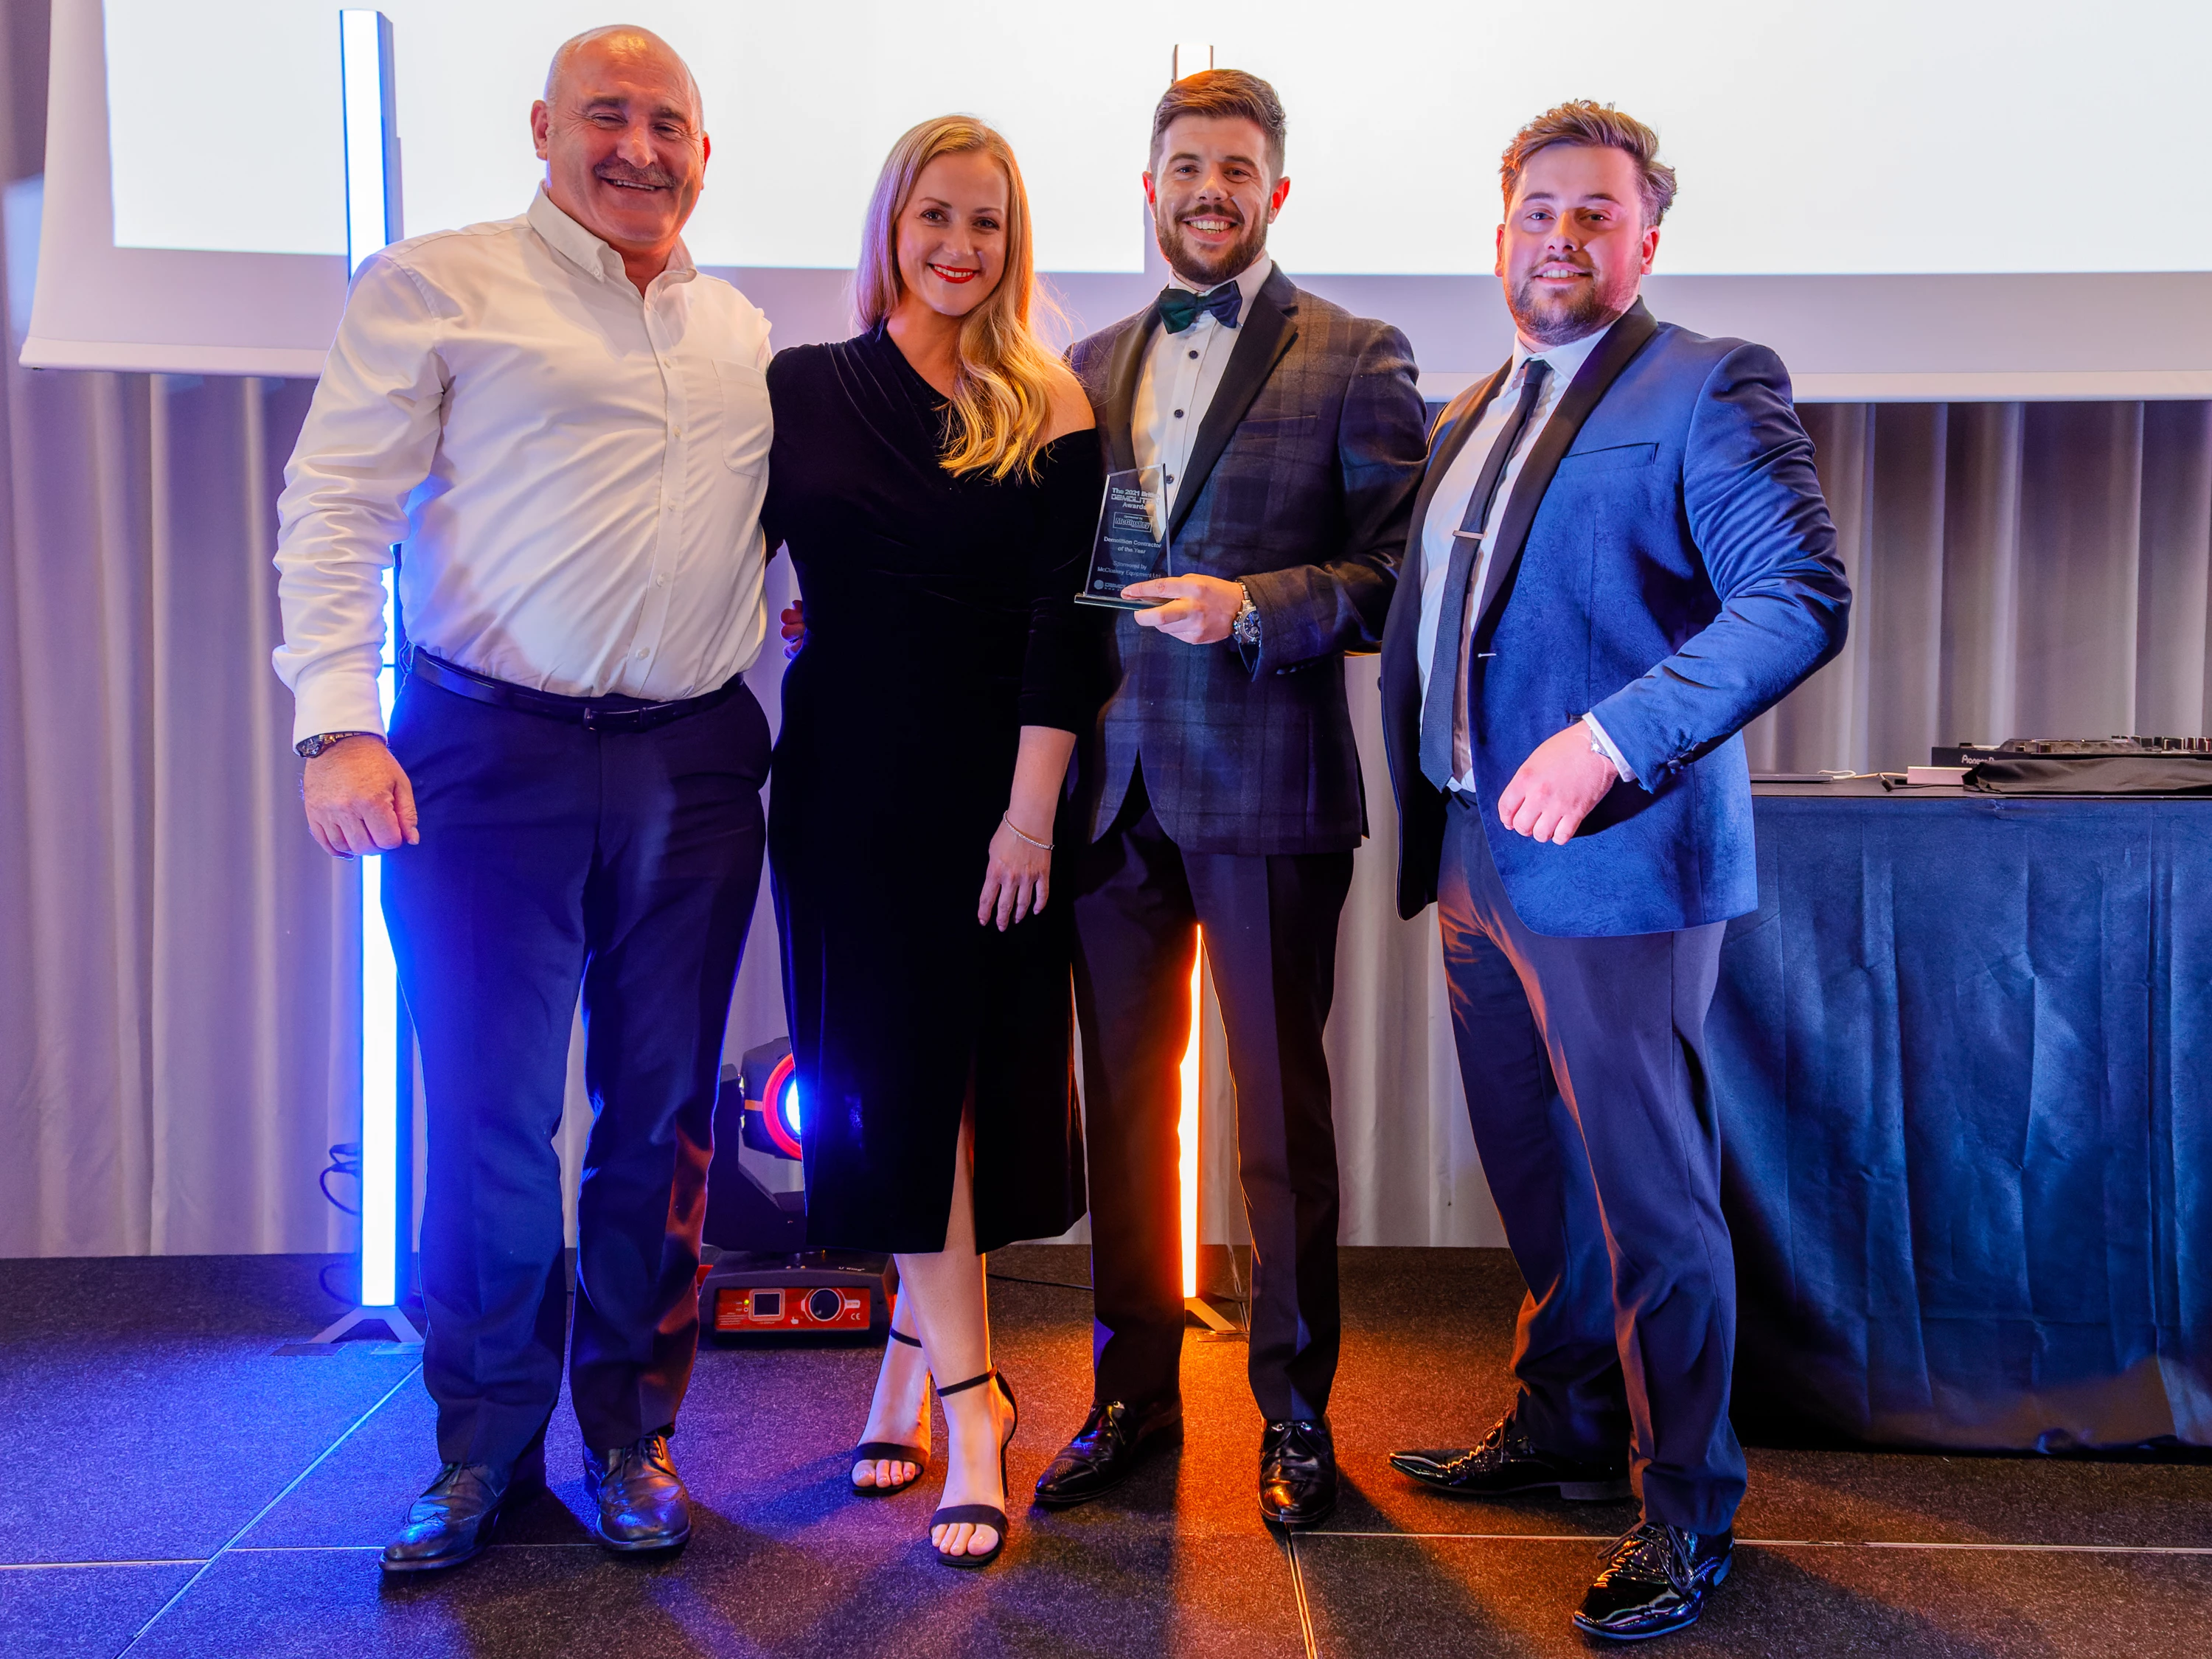 Cawarden is crowned 'Demolition Contractor of the Year' 2021